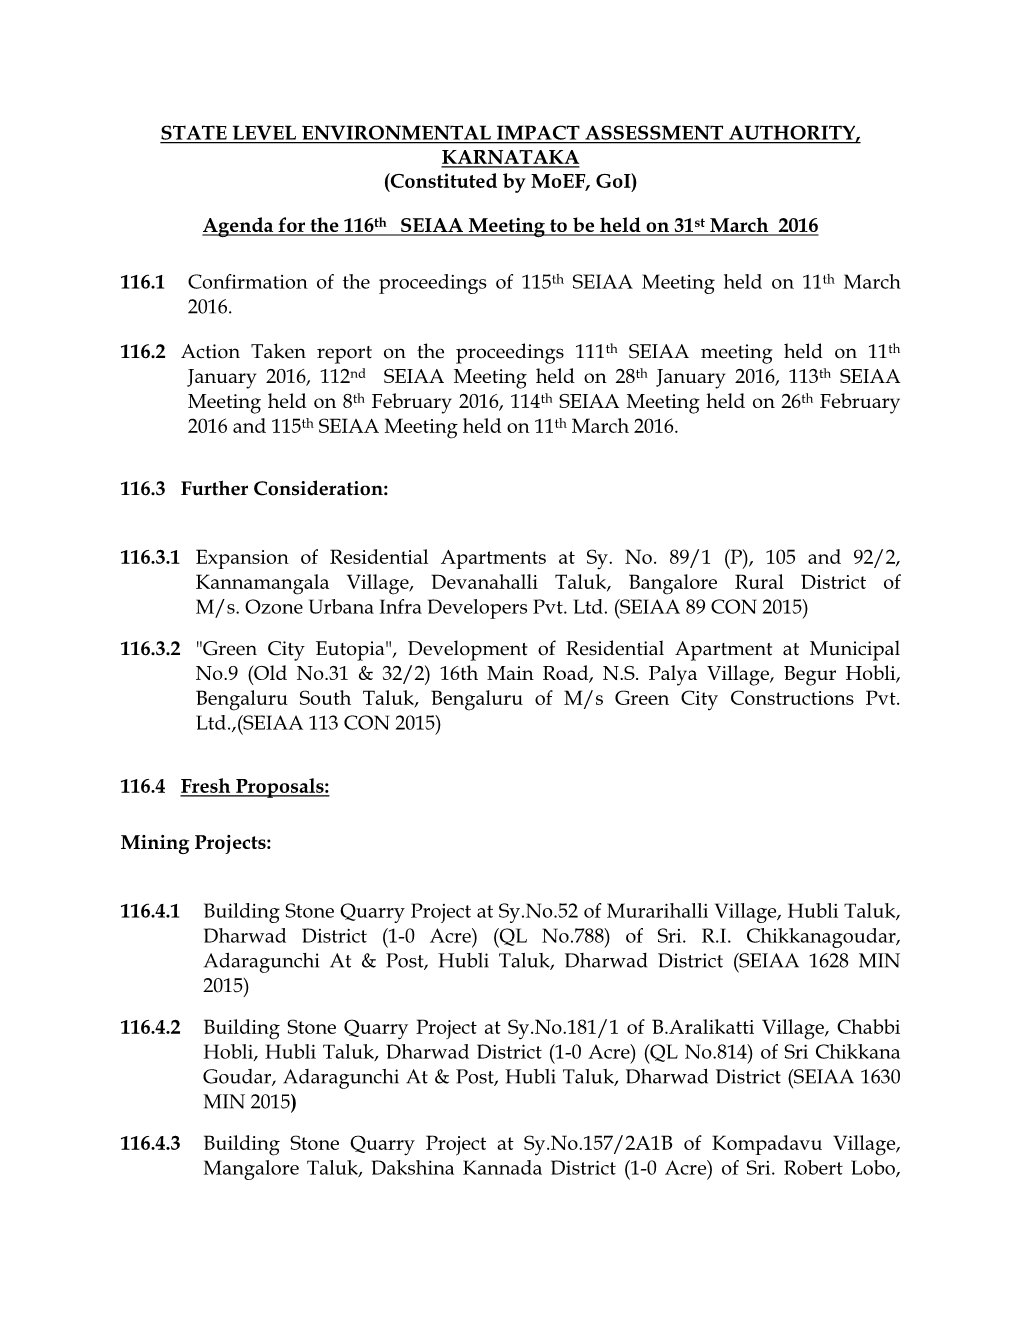 (Constituted by Moef, Goi) Agenda for the 116Th SEIAA Meeting T